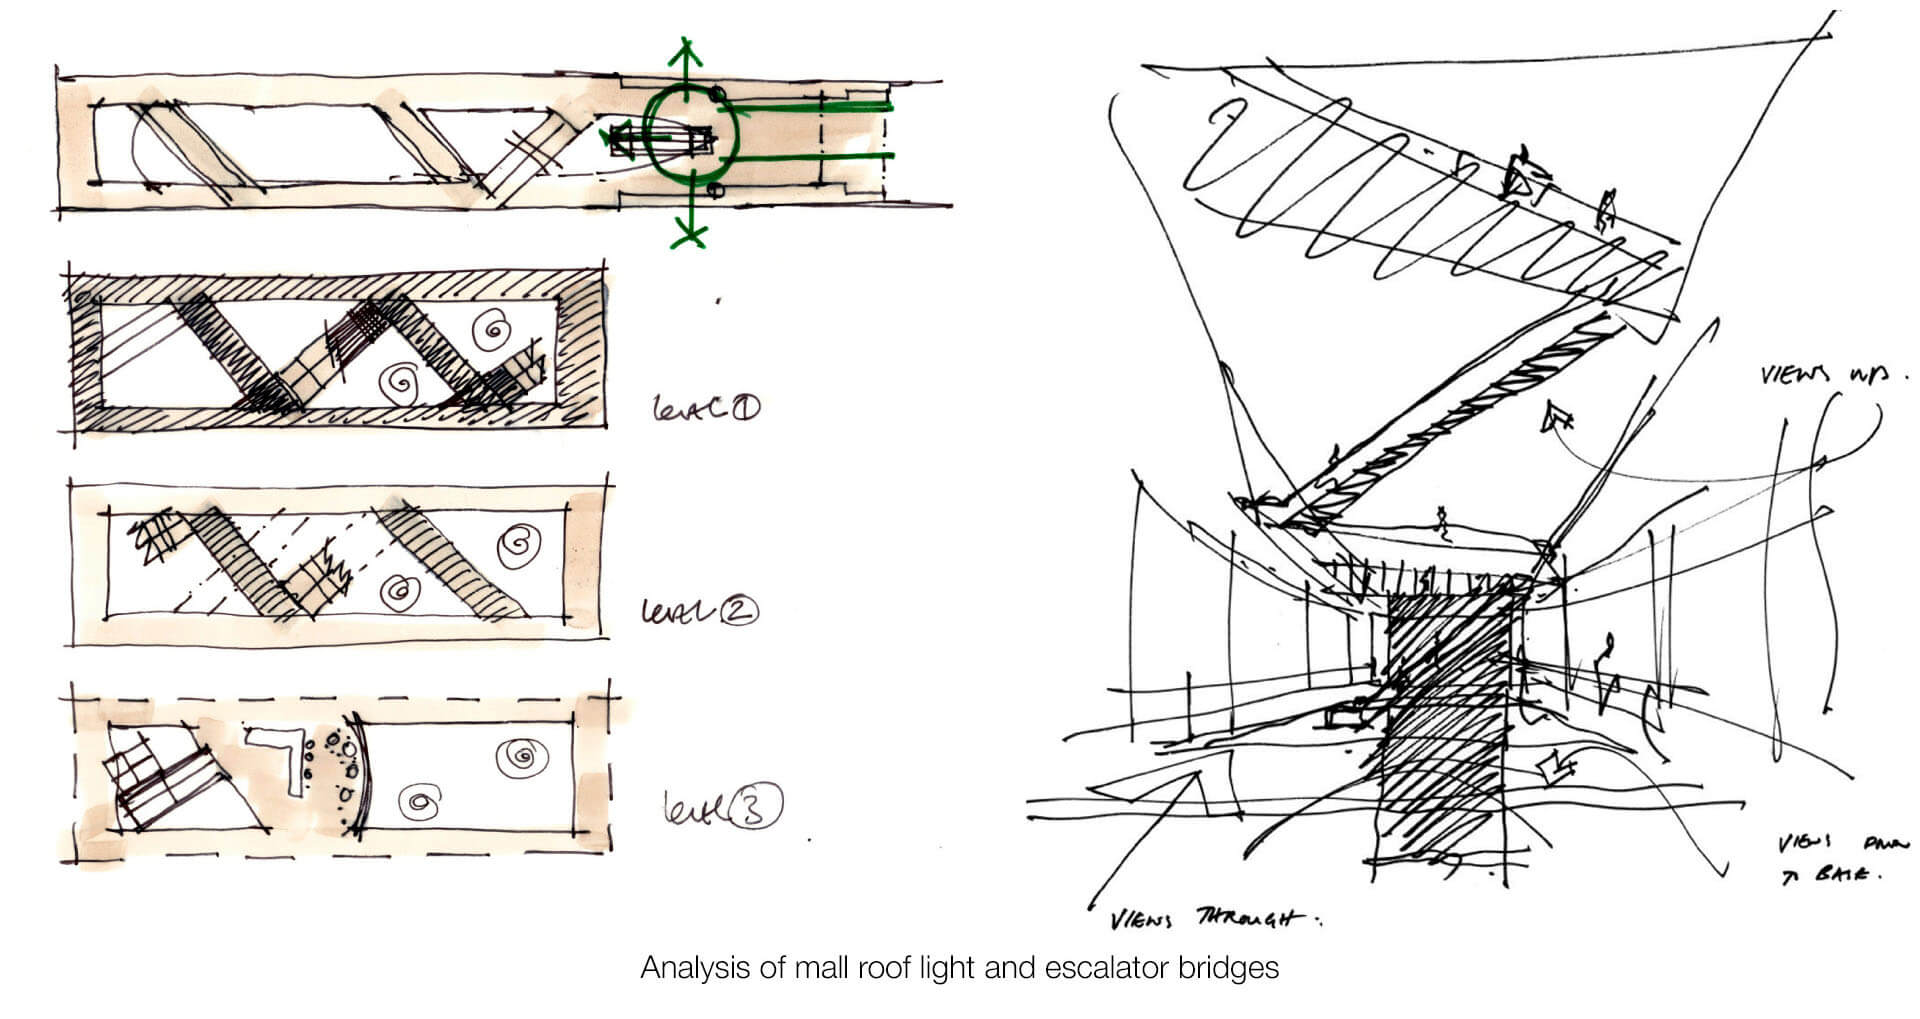 Hammerson shopping mall architecture format planning, interior design sketches